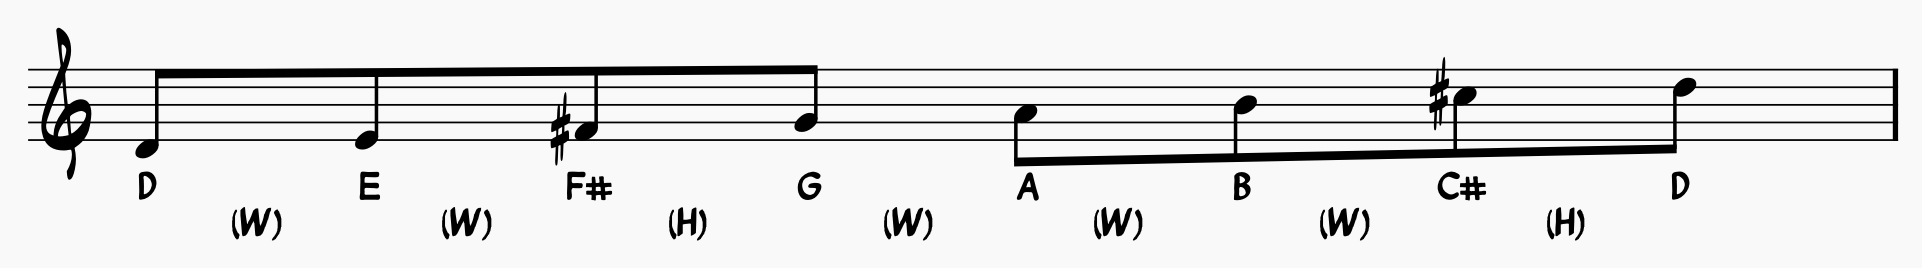 D Major Scale notated with whole steps and half steps